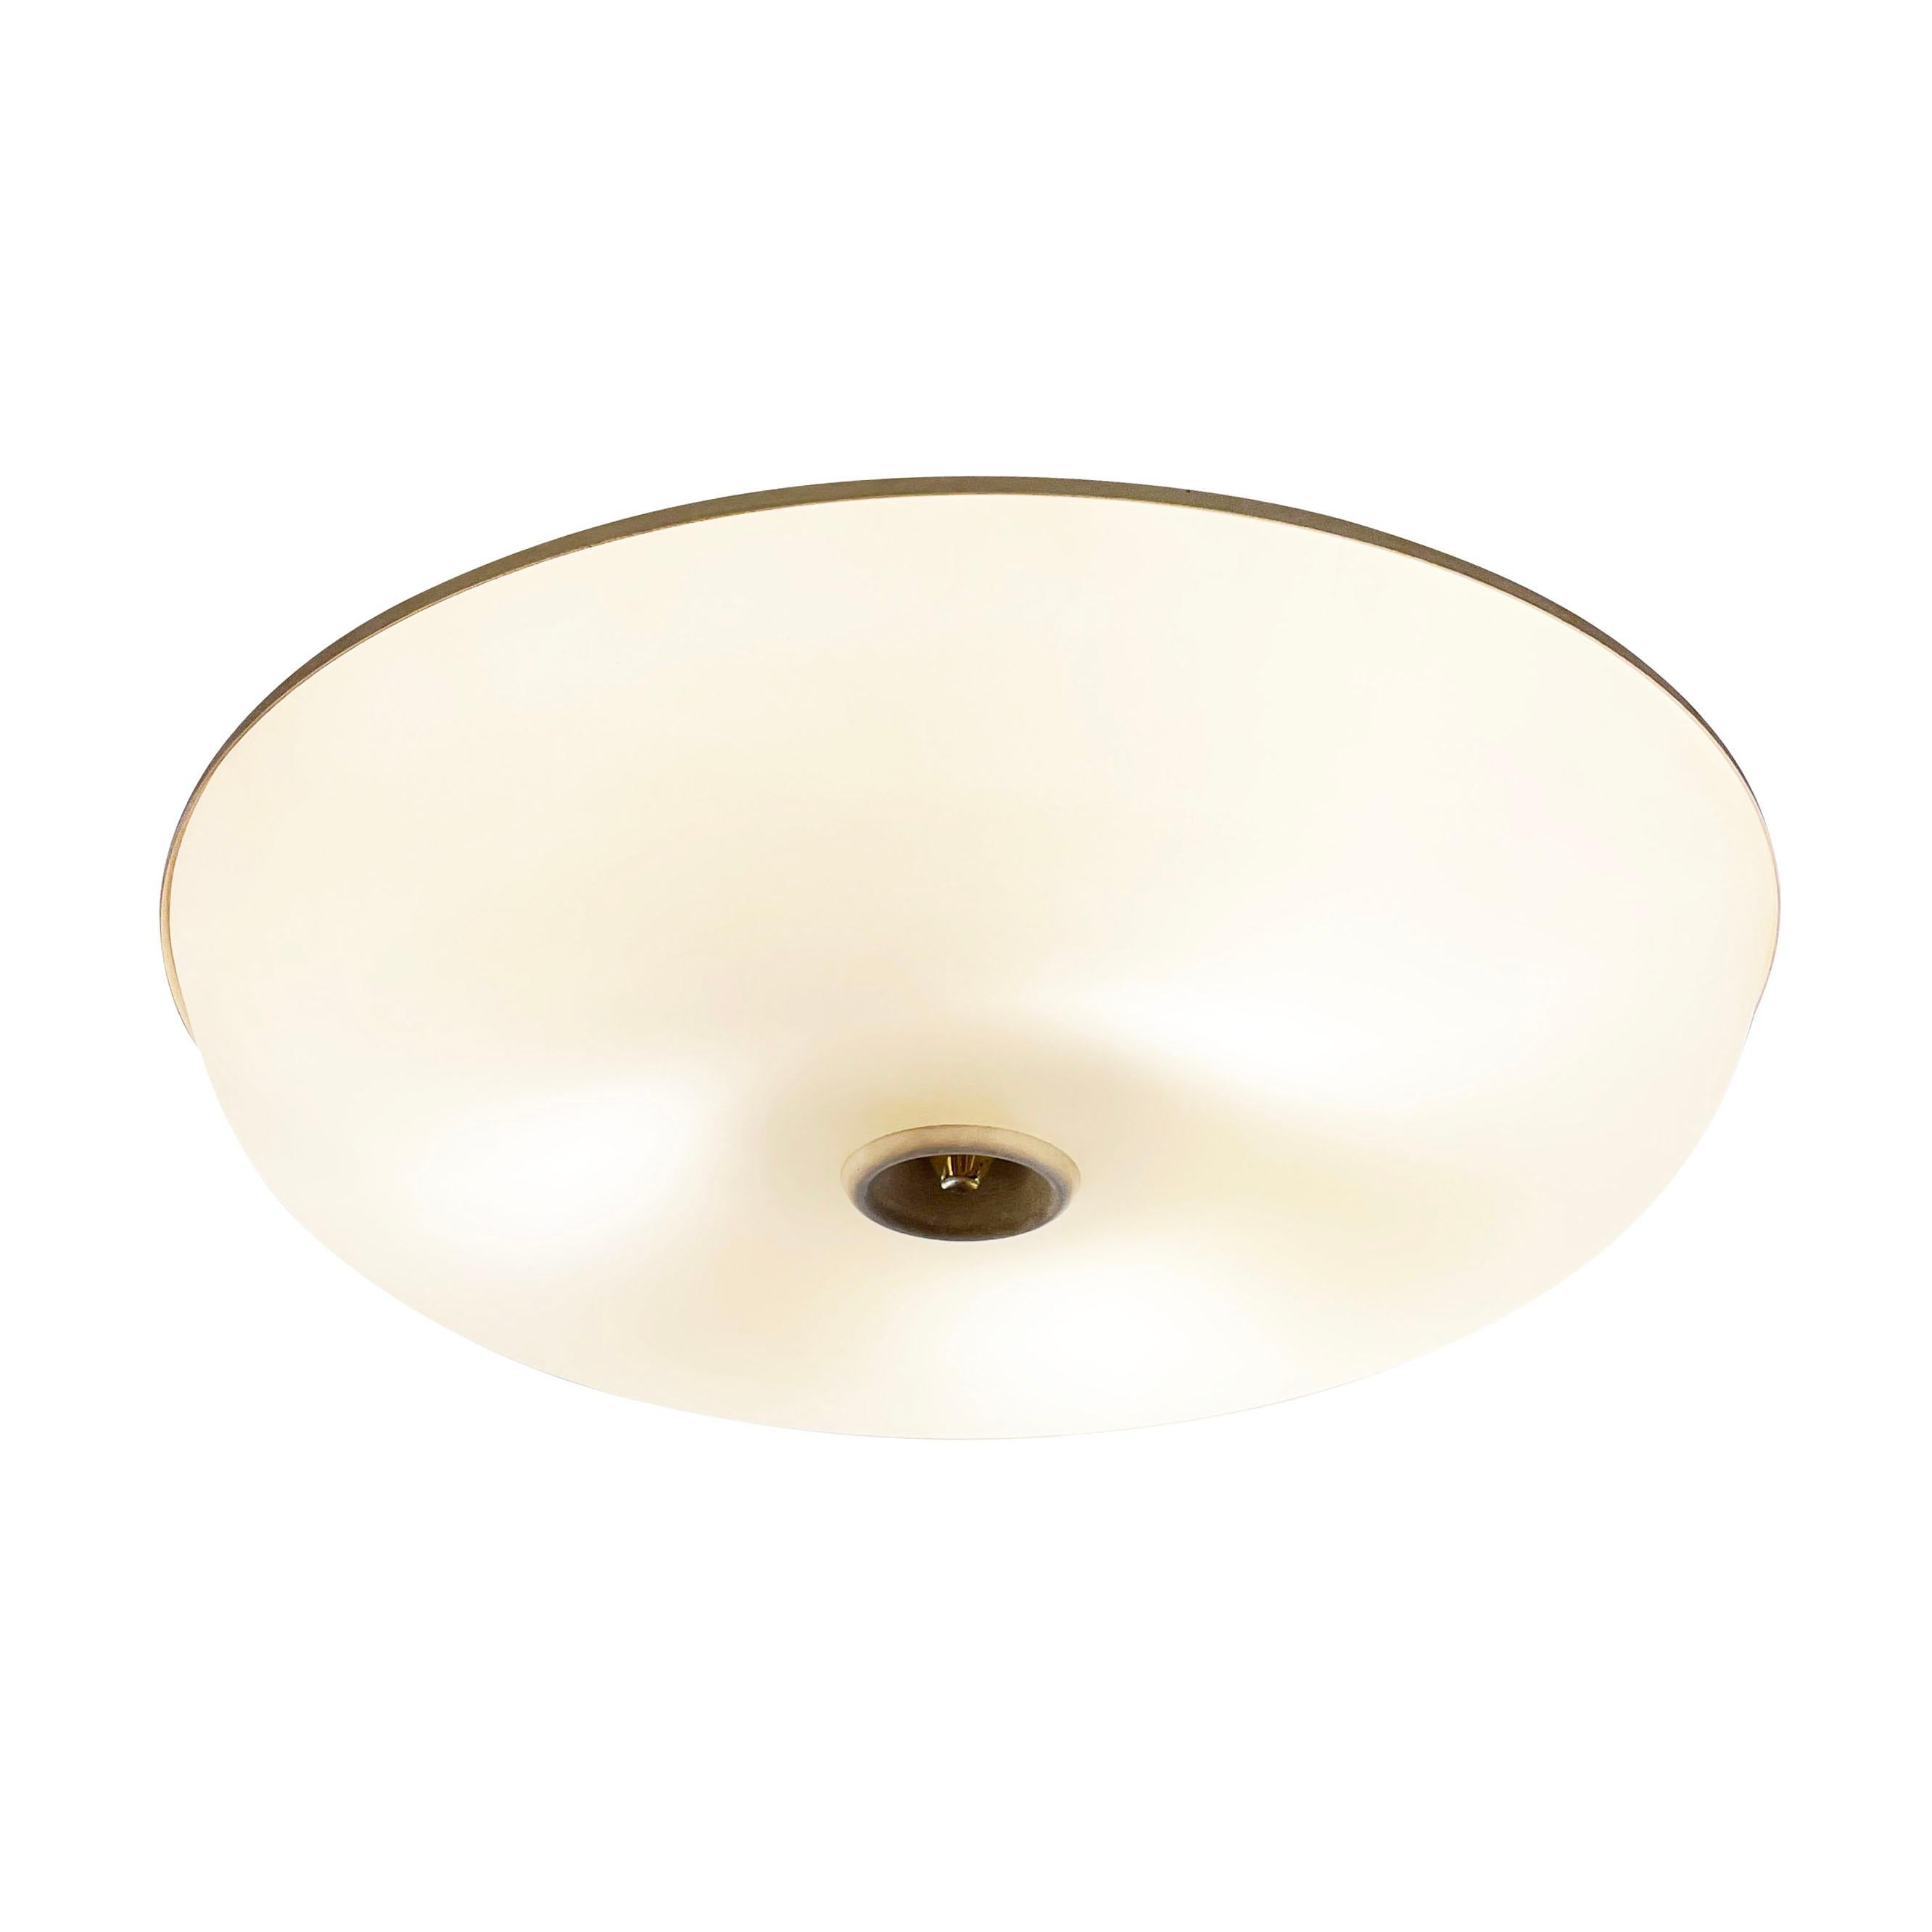 1960’s Fontana Arte flush mount model 1732 with a molded frosted glass shade and white lacquered frame. Holds three E12 bulbs.

Condition: 
Good vintage condition, minor wear consistent with age and use

Measures: Diameter: 16”
Height: